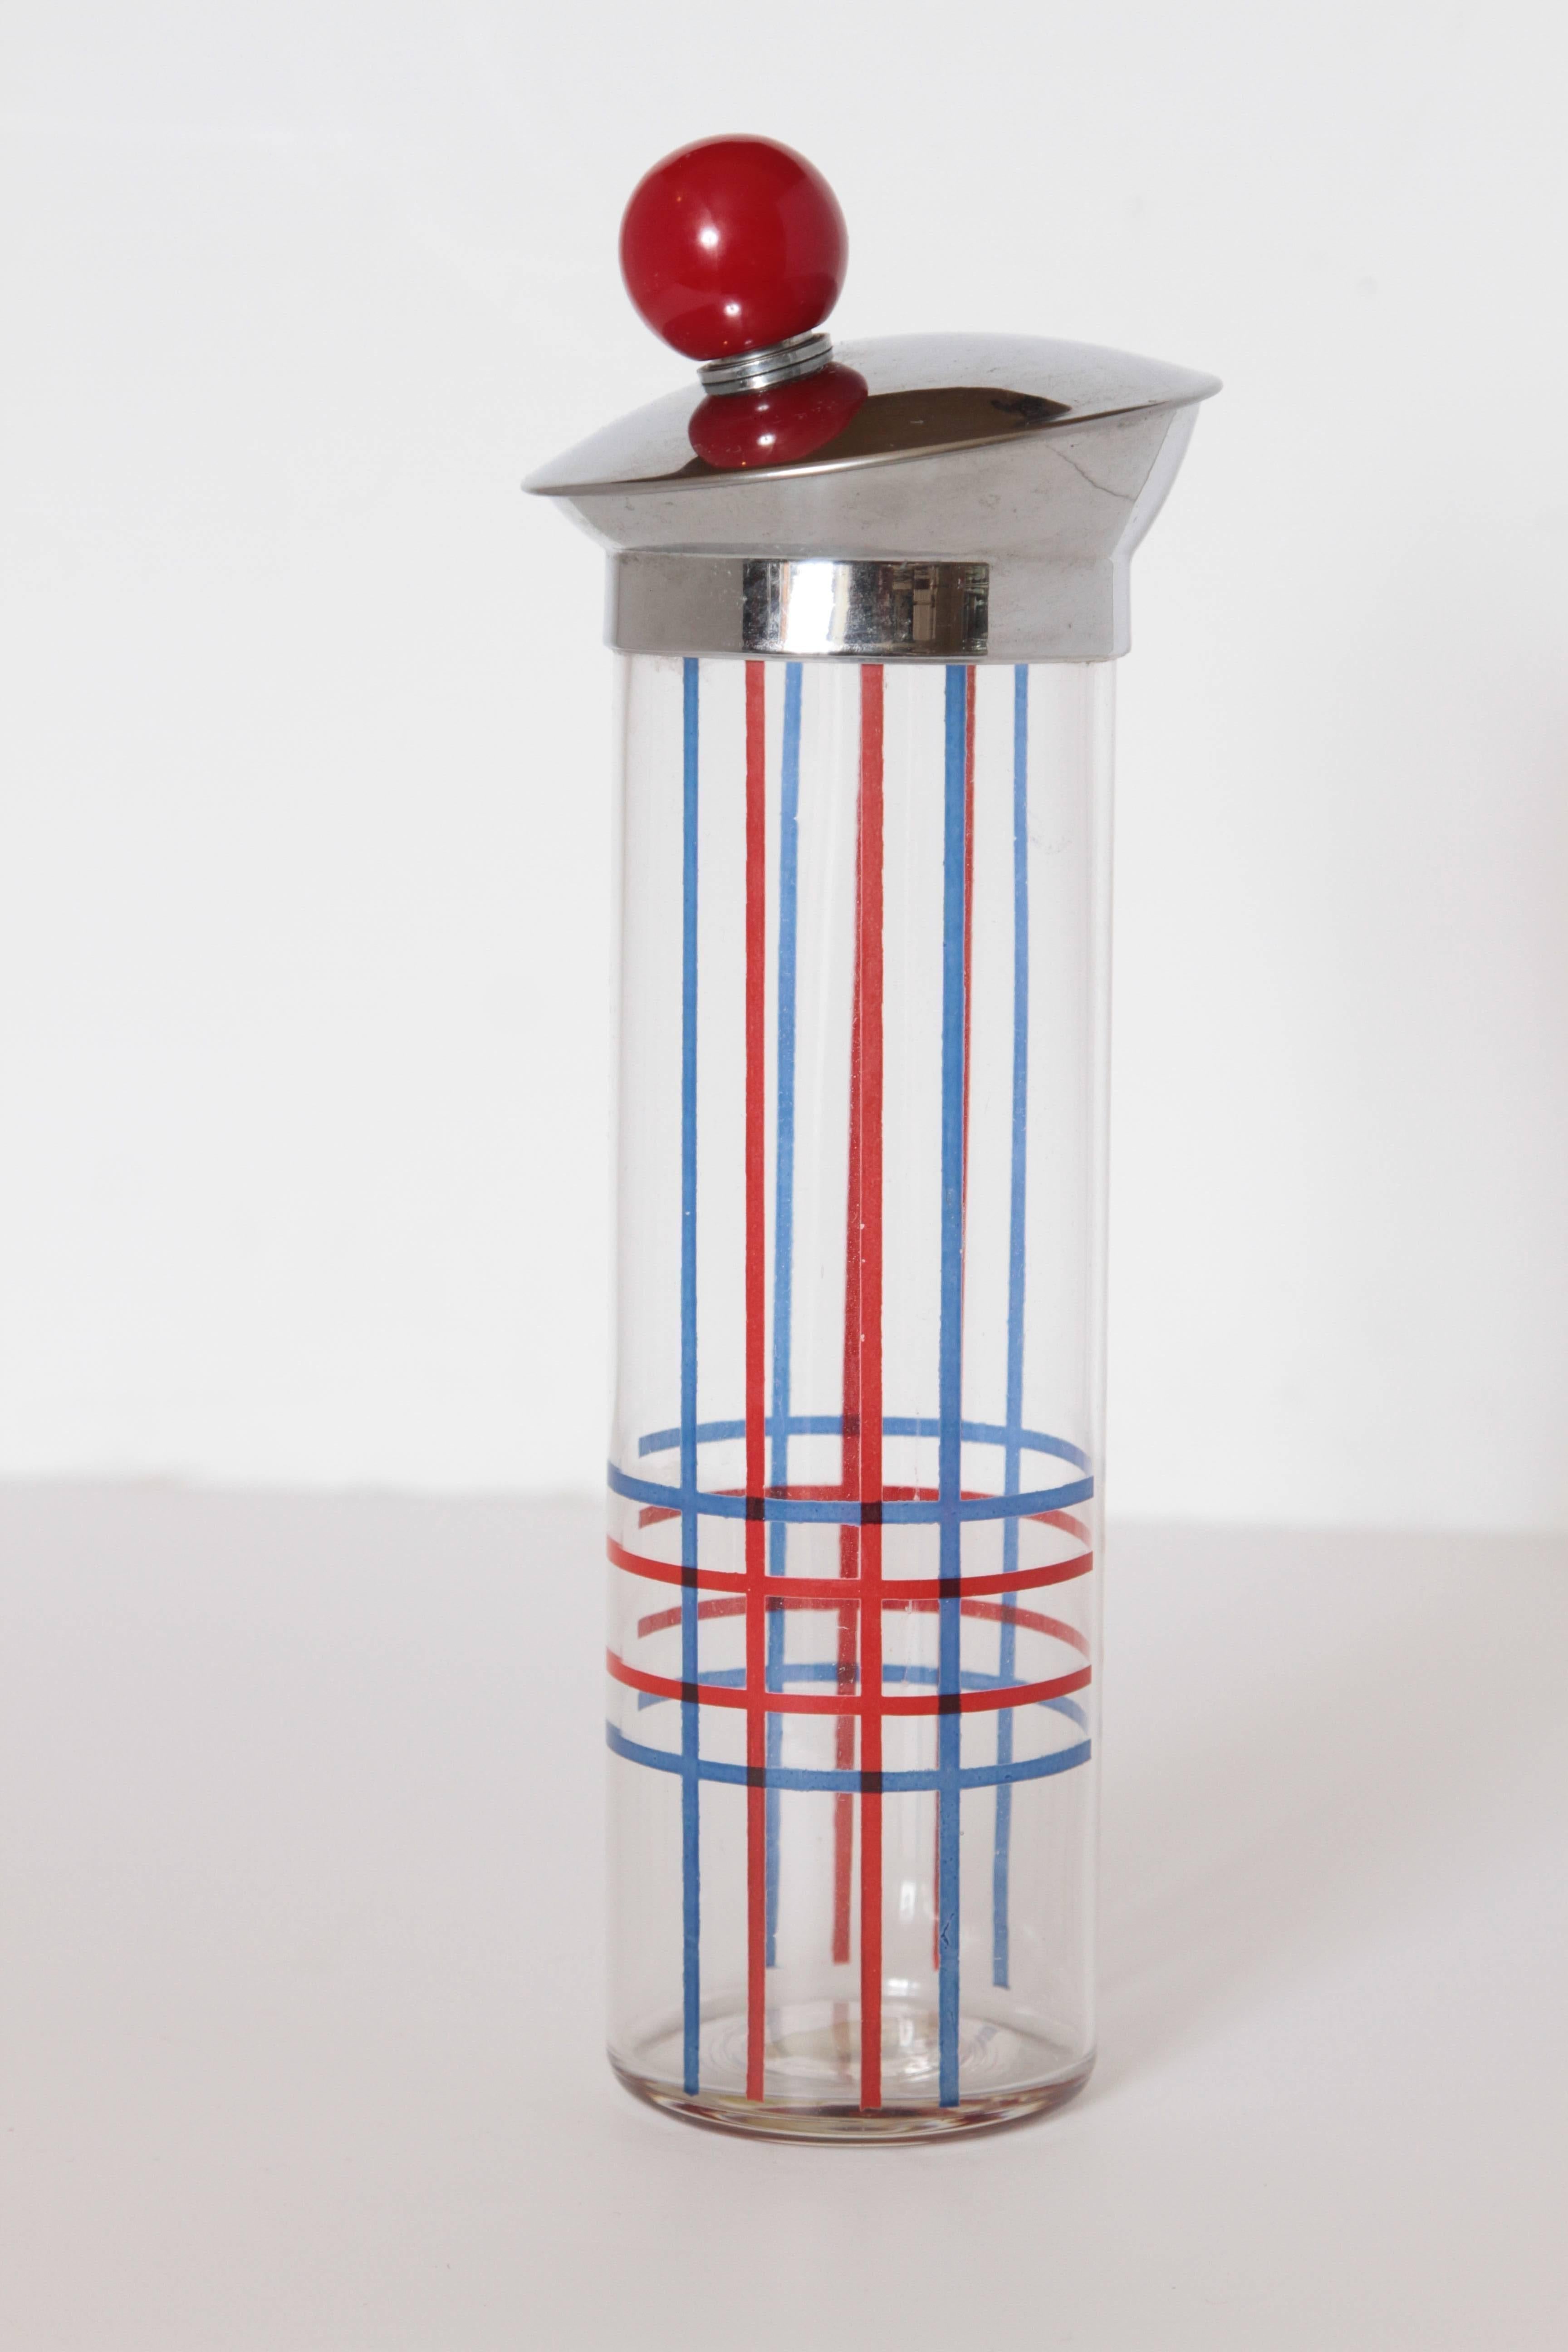 Painted Art Deco Cocktail Shaker, Patented Design, Tam-O-Shaker by Seymour Products